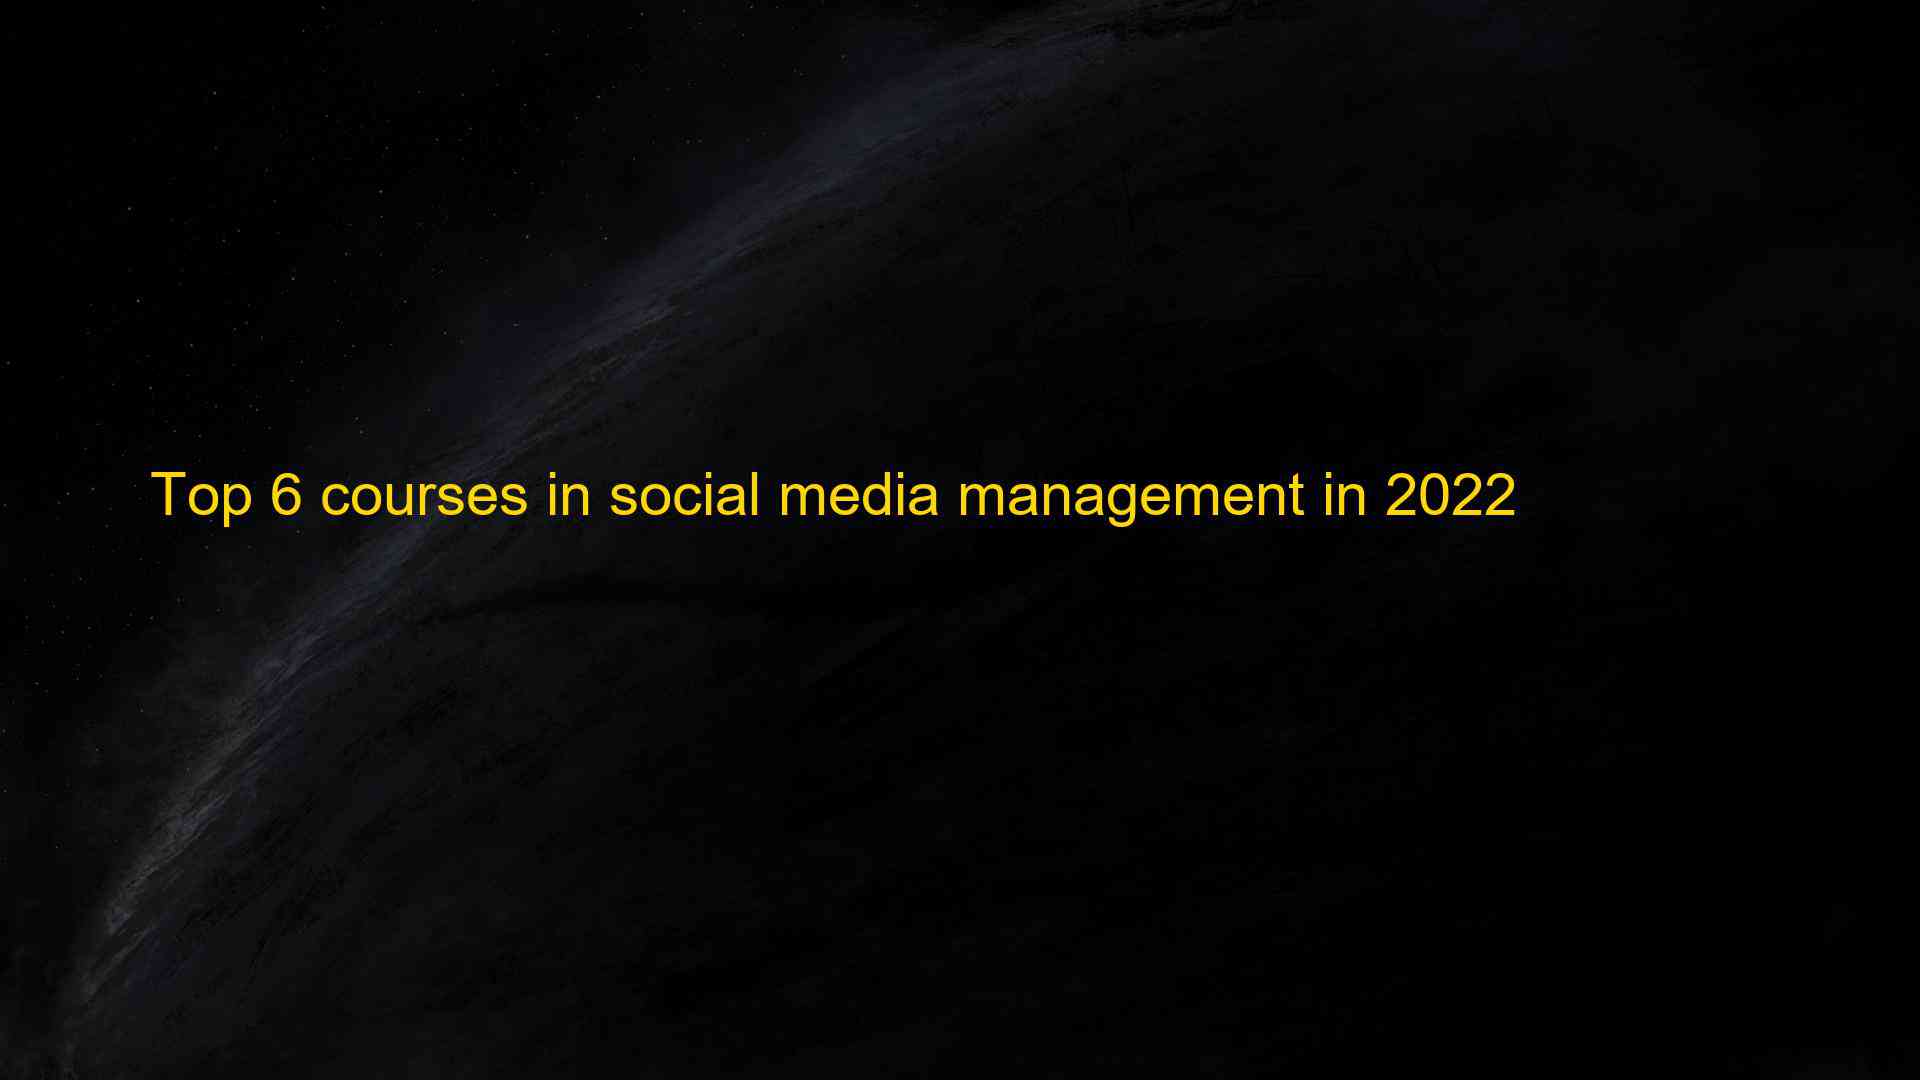 Top 6 courses in social media management in 2022 1660958097